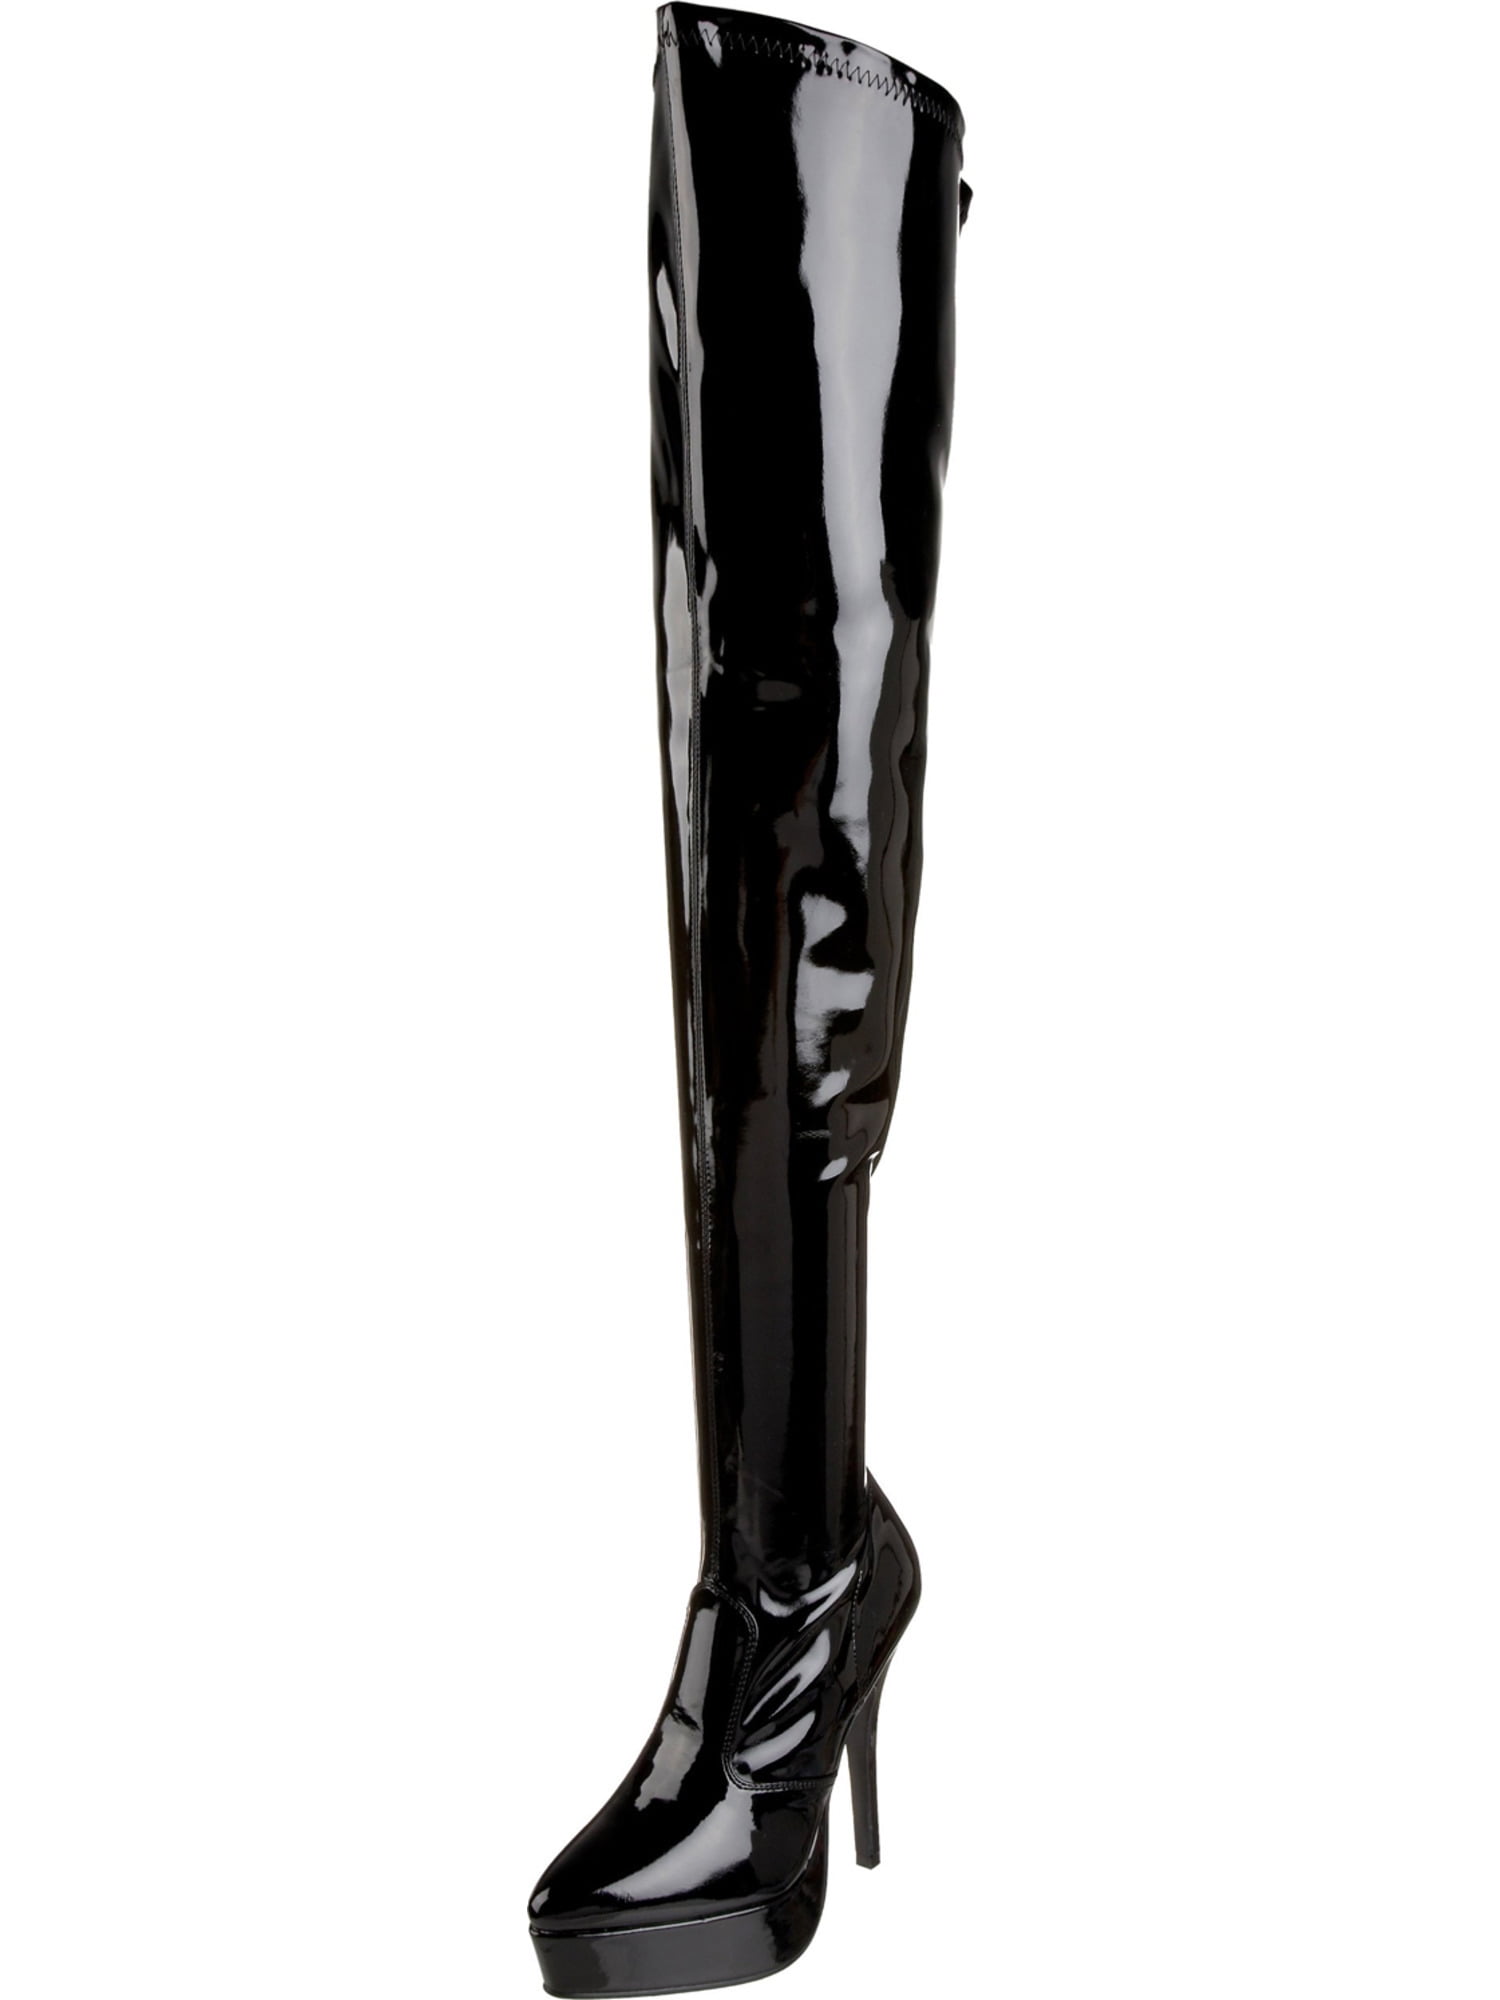 SummitFashions - Womens Thigh High Boots 5 Inch Heels Black Patent Poly ...